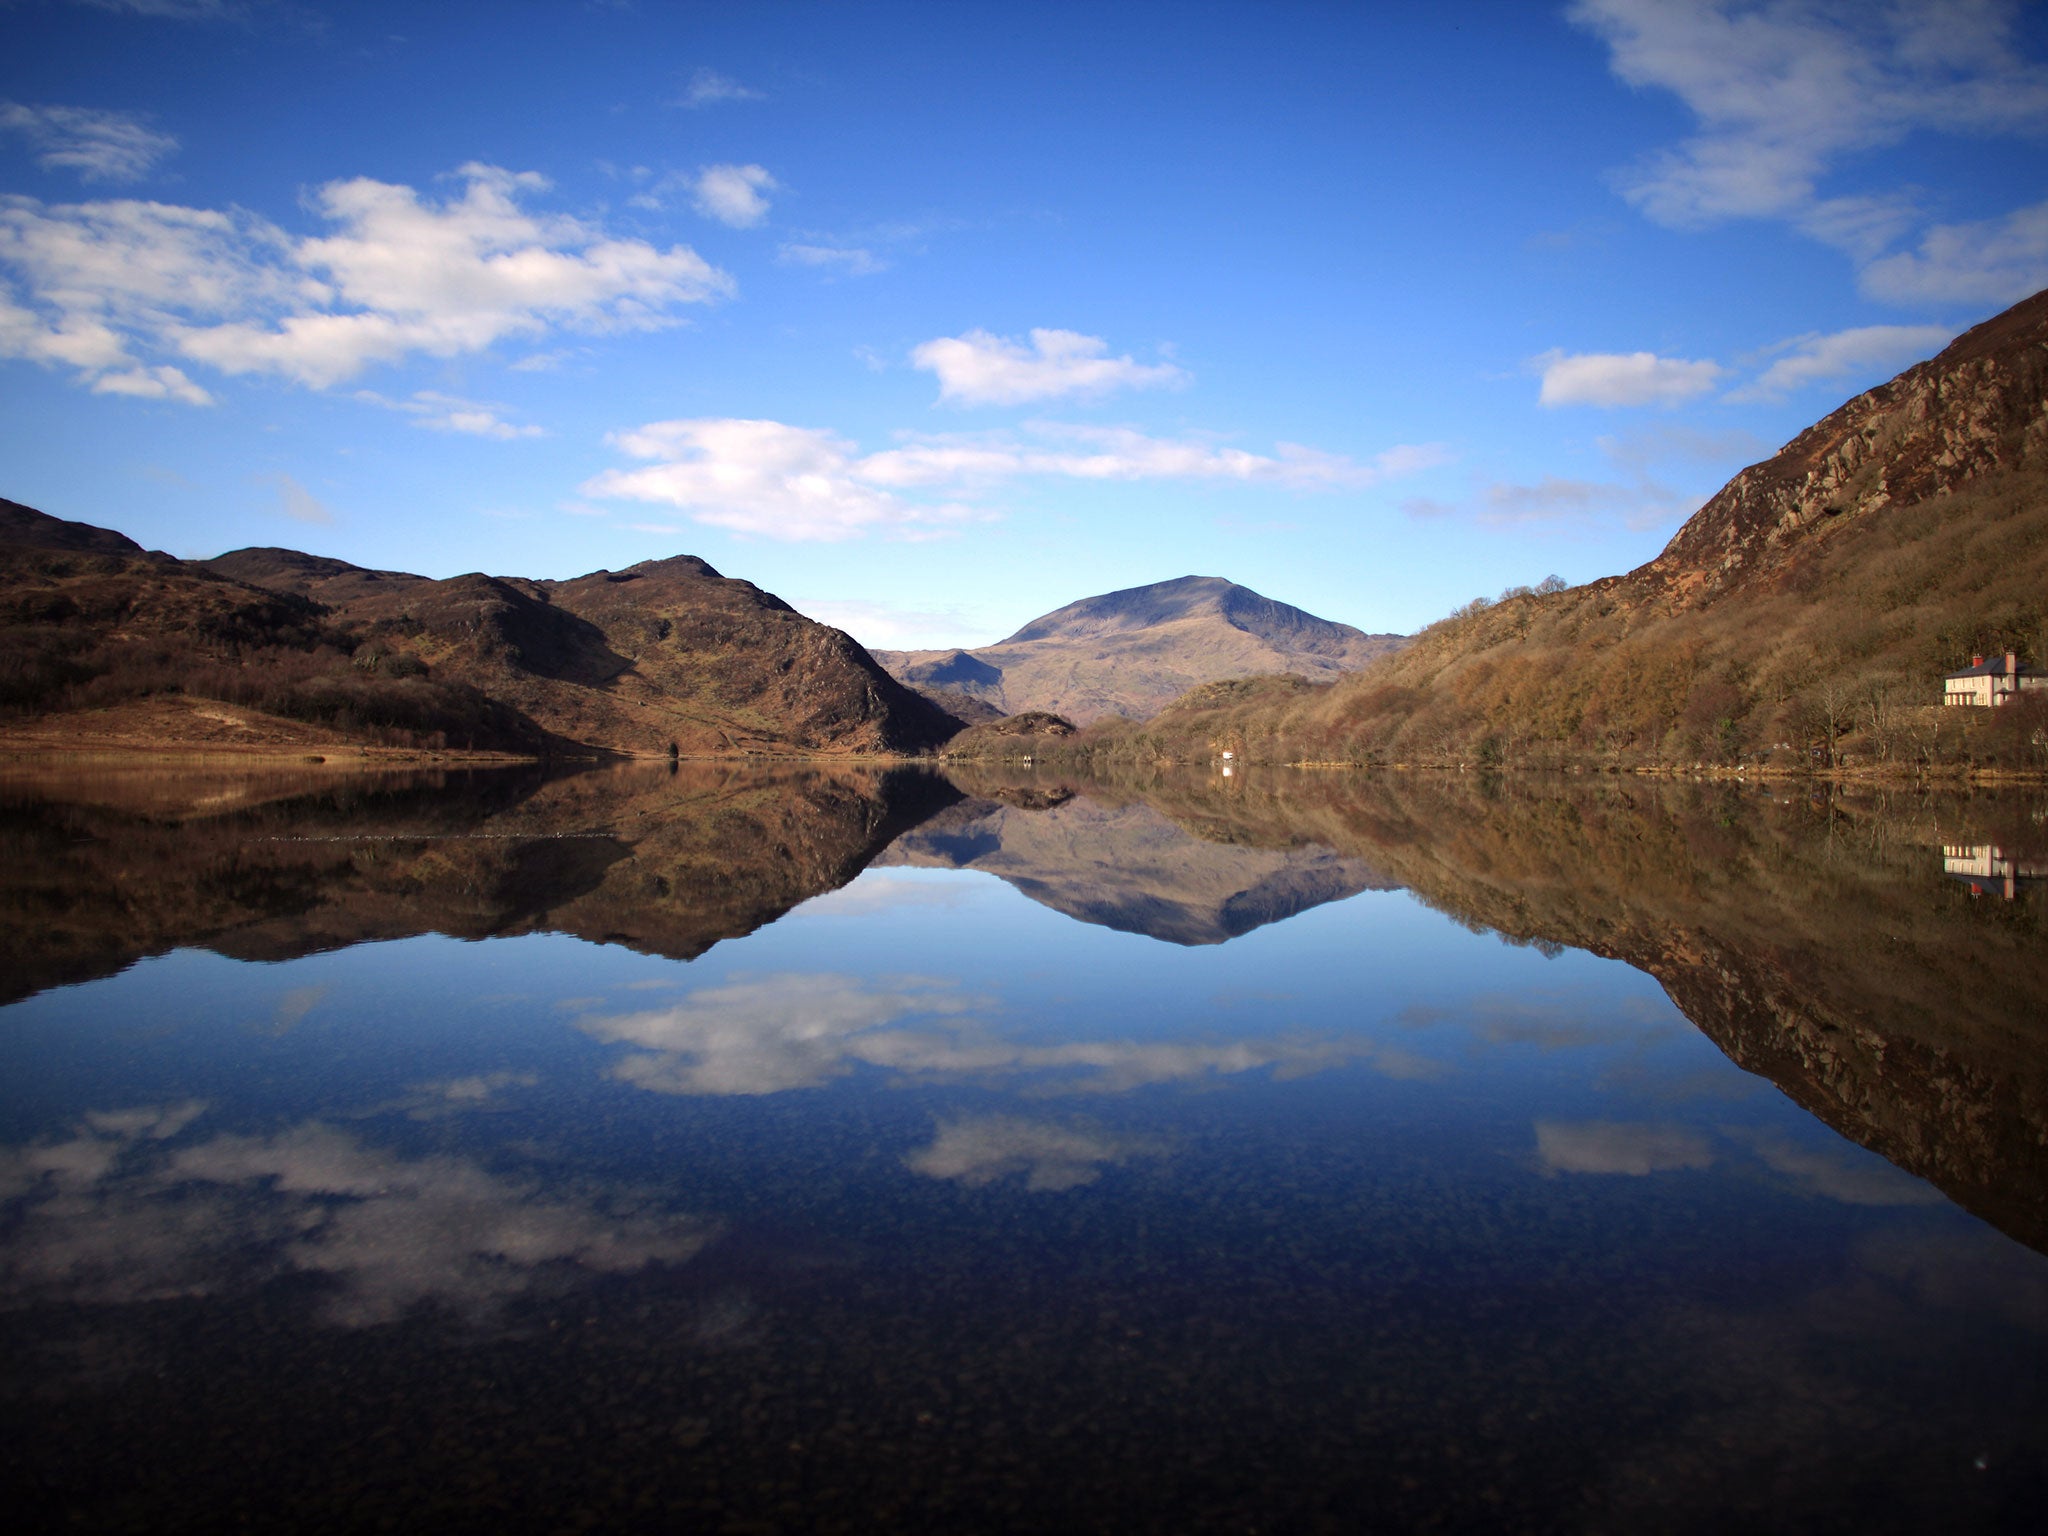 A view of tranquil Llyn Dinas in Snowdonia National Park